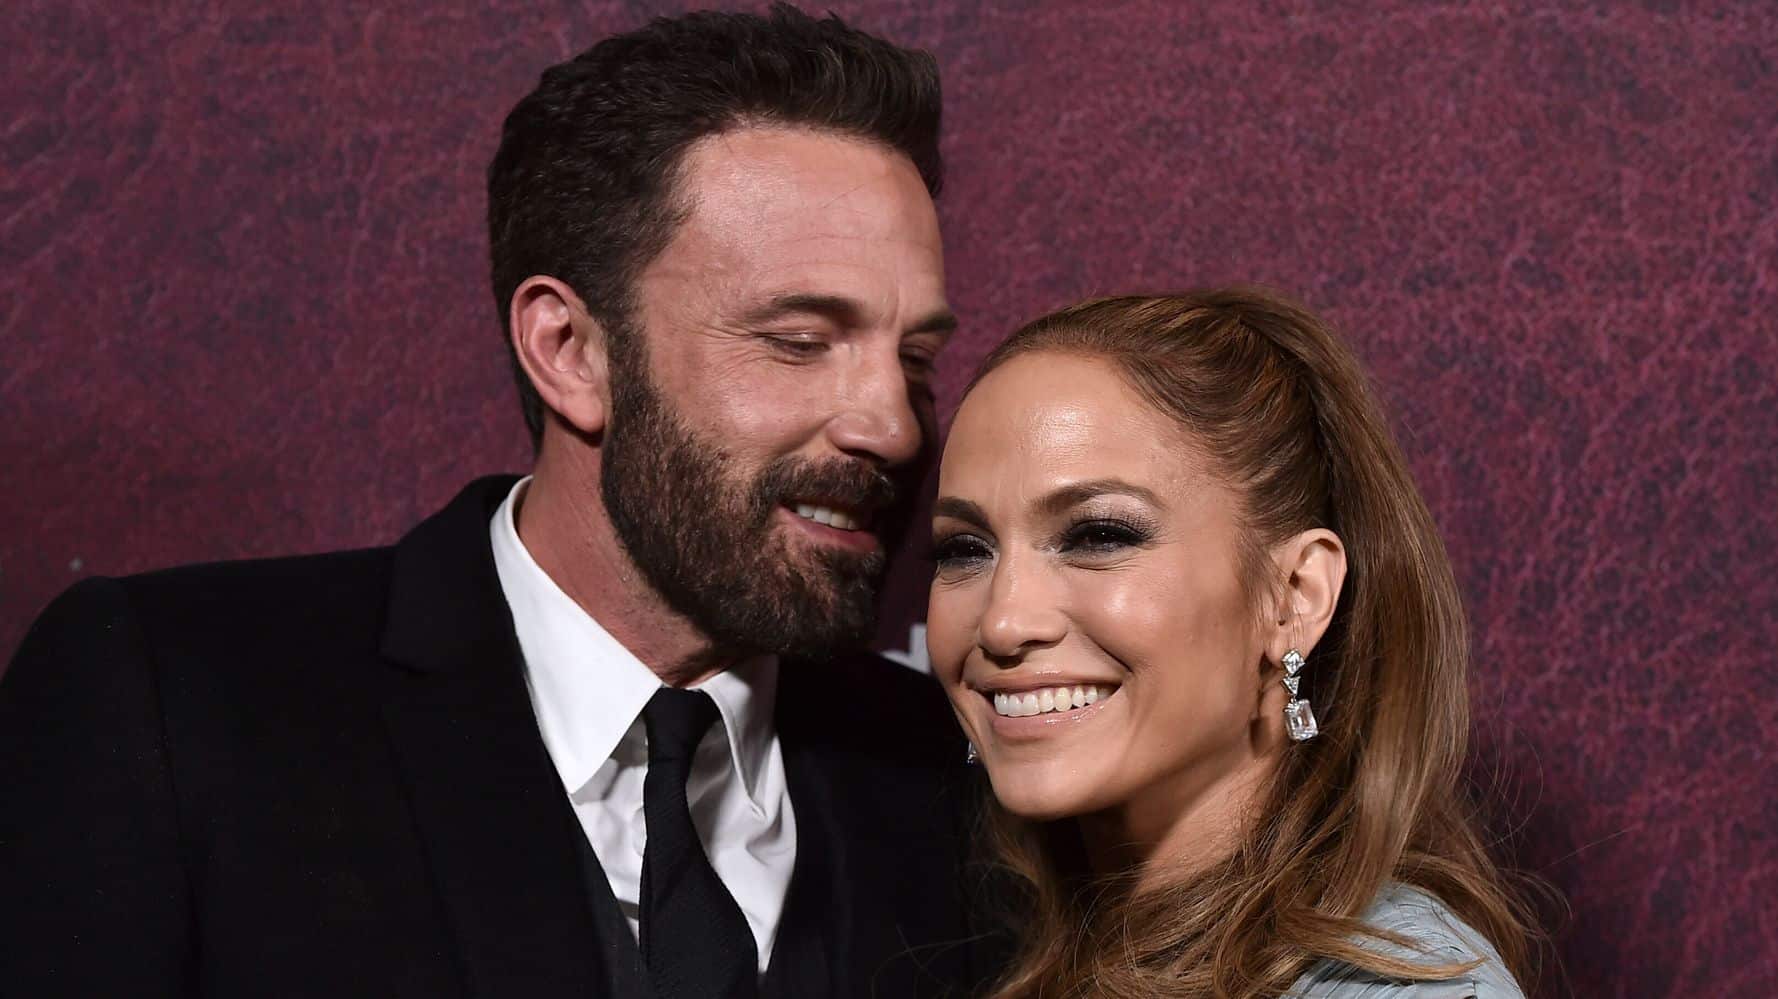 Jennifer Lopez And Ben Affleck Reportedly Plan Second Wedding Ceremony For Friends, Family | HuffPost Entertainment